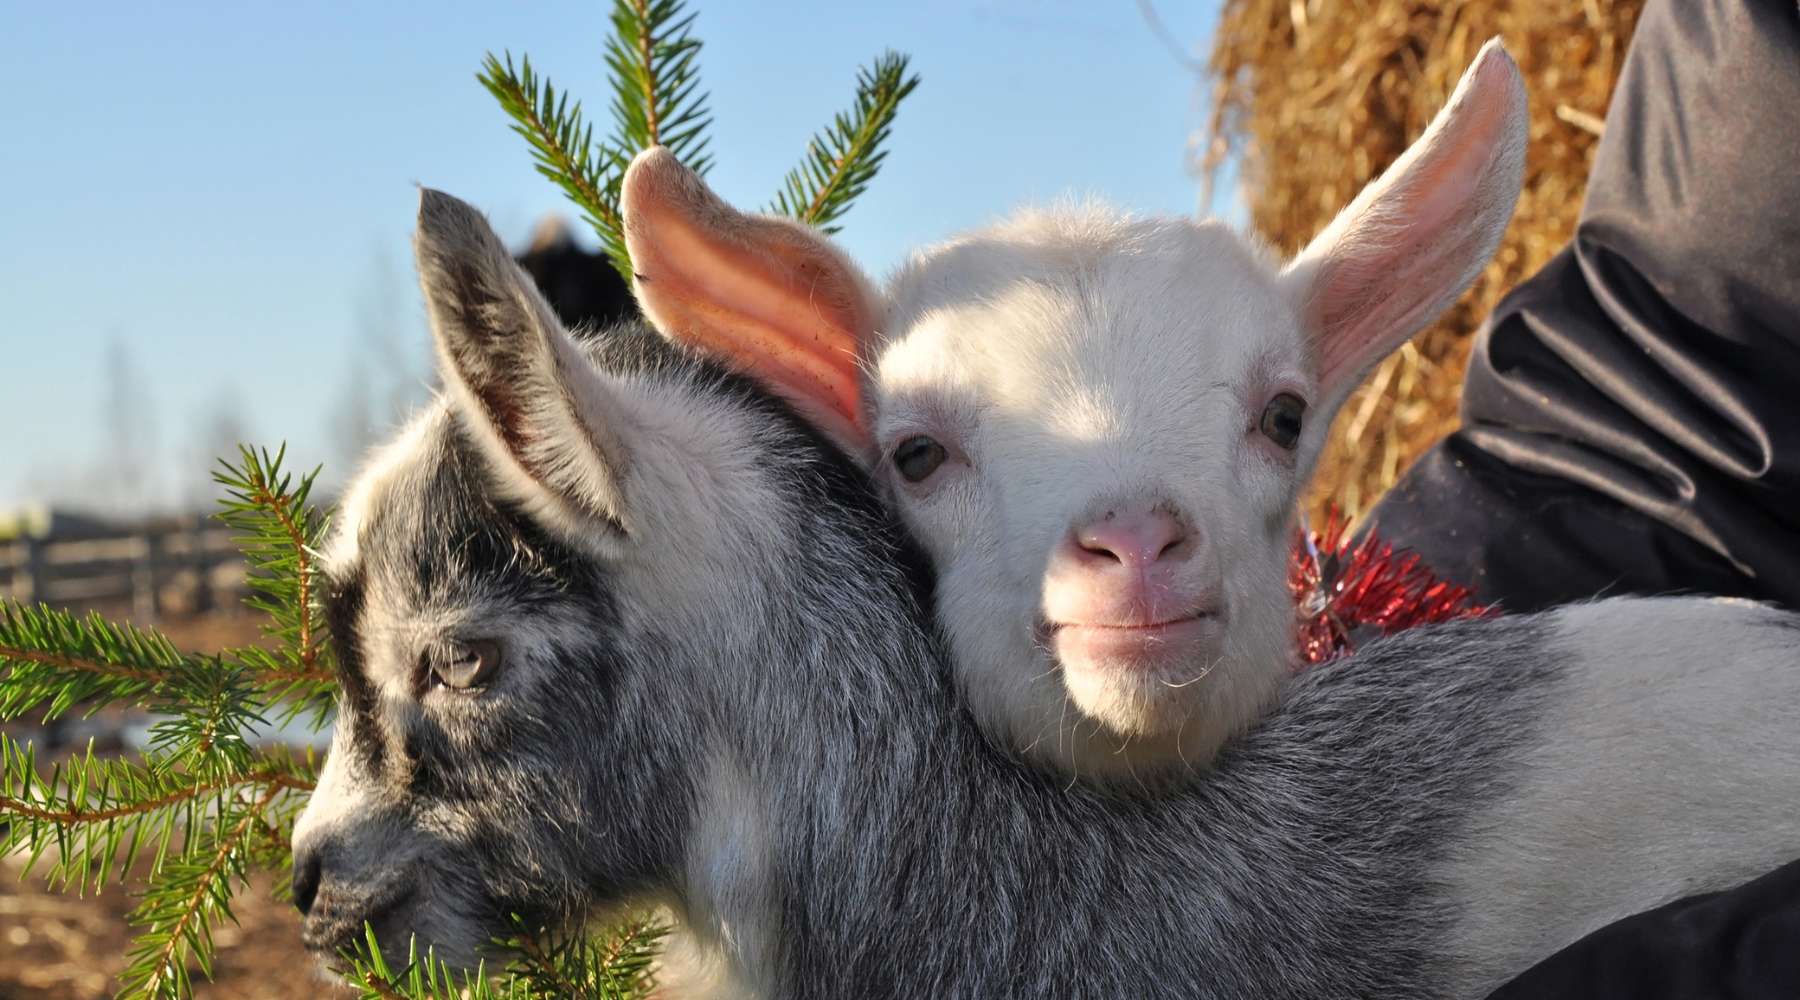 Goats with a Christmas tree